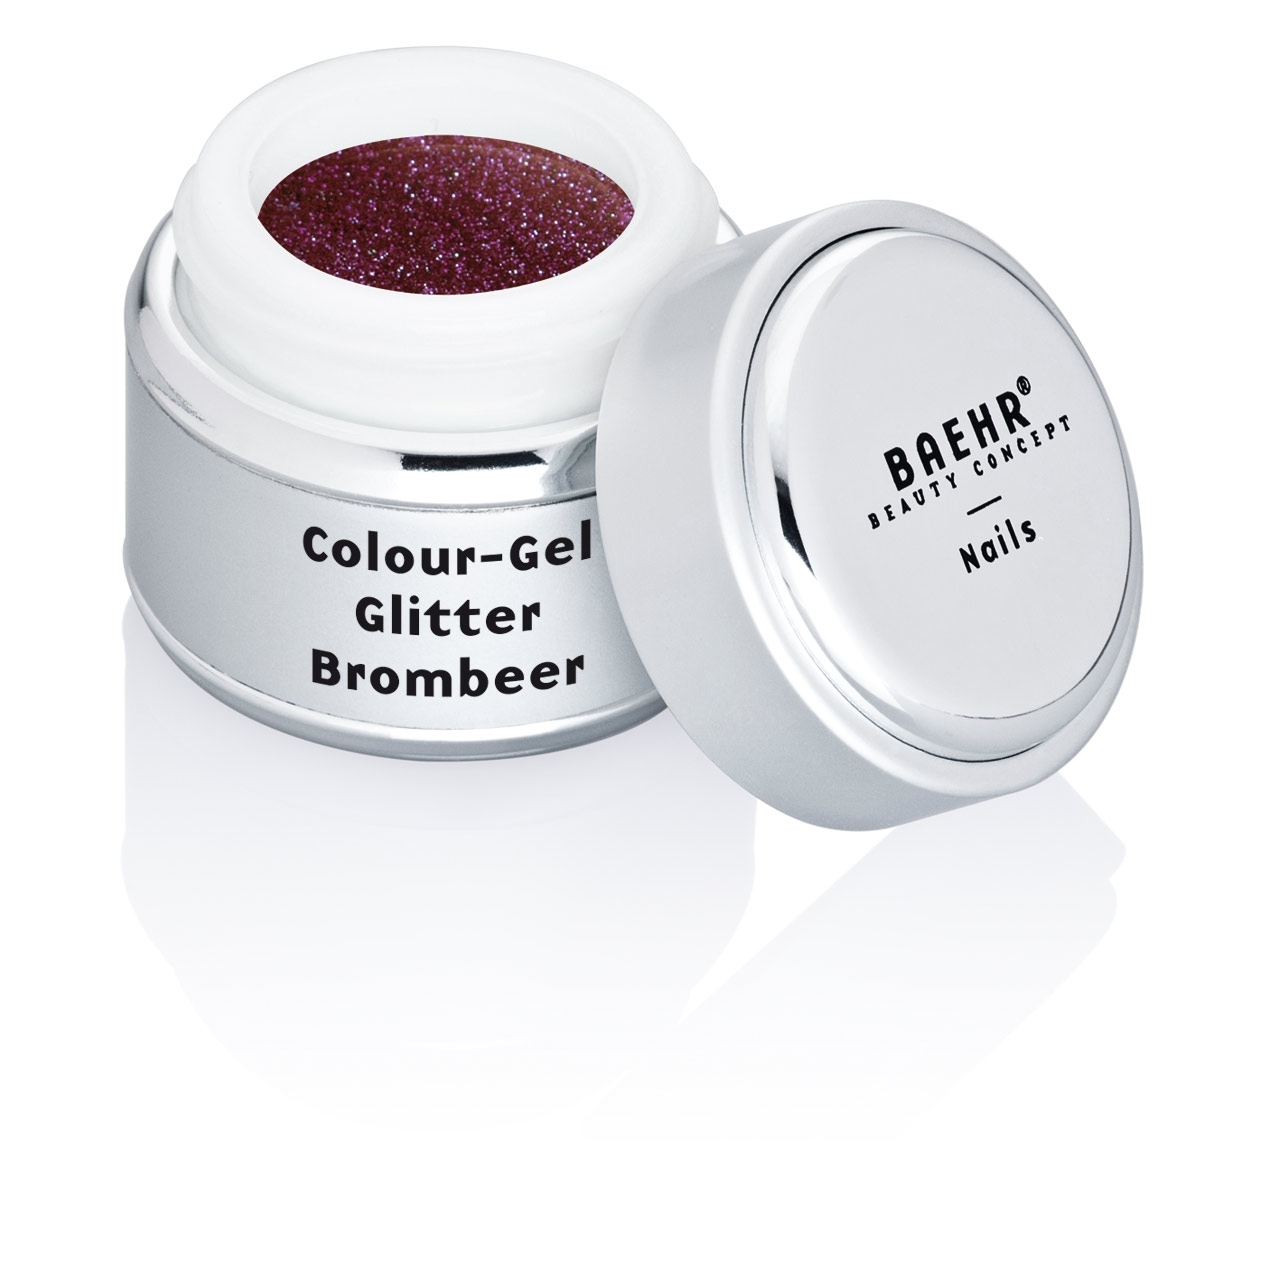 BAEHR BEAUTY CONCEPT - NAILS Colour-Gel Glitter Brombeer 5 ml